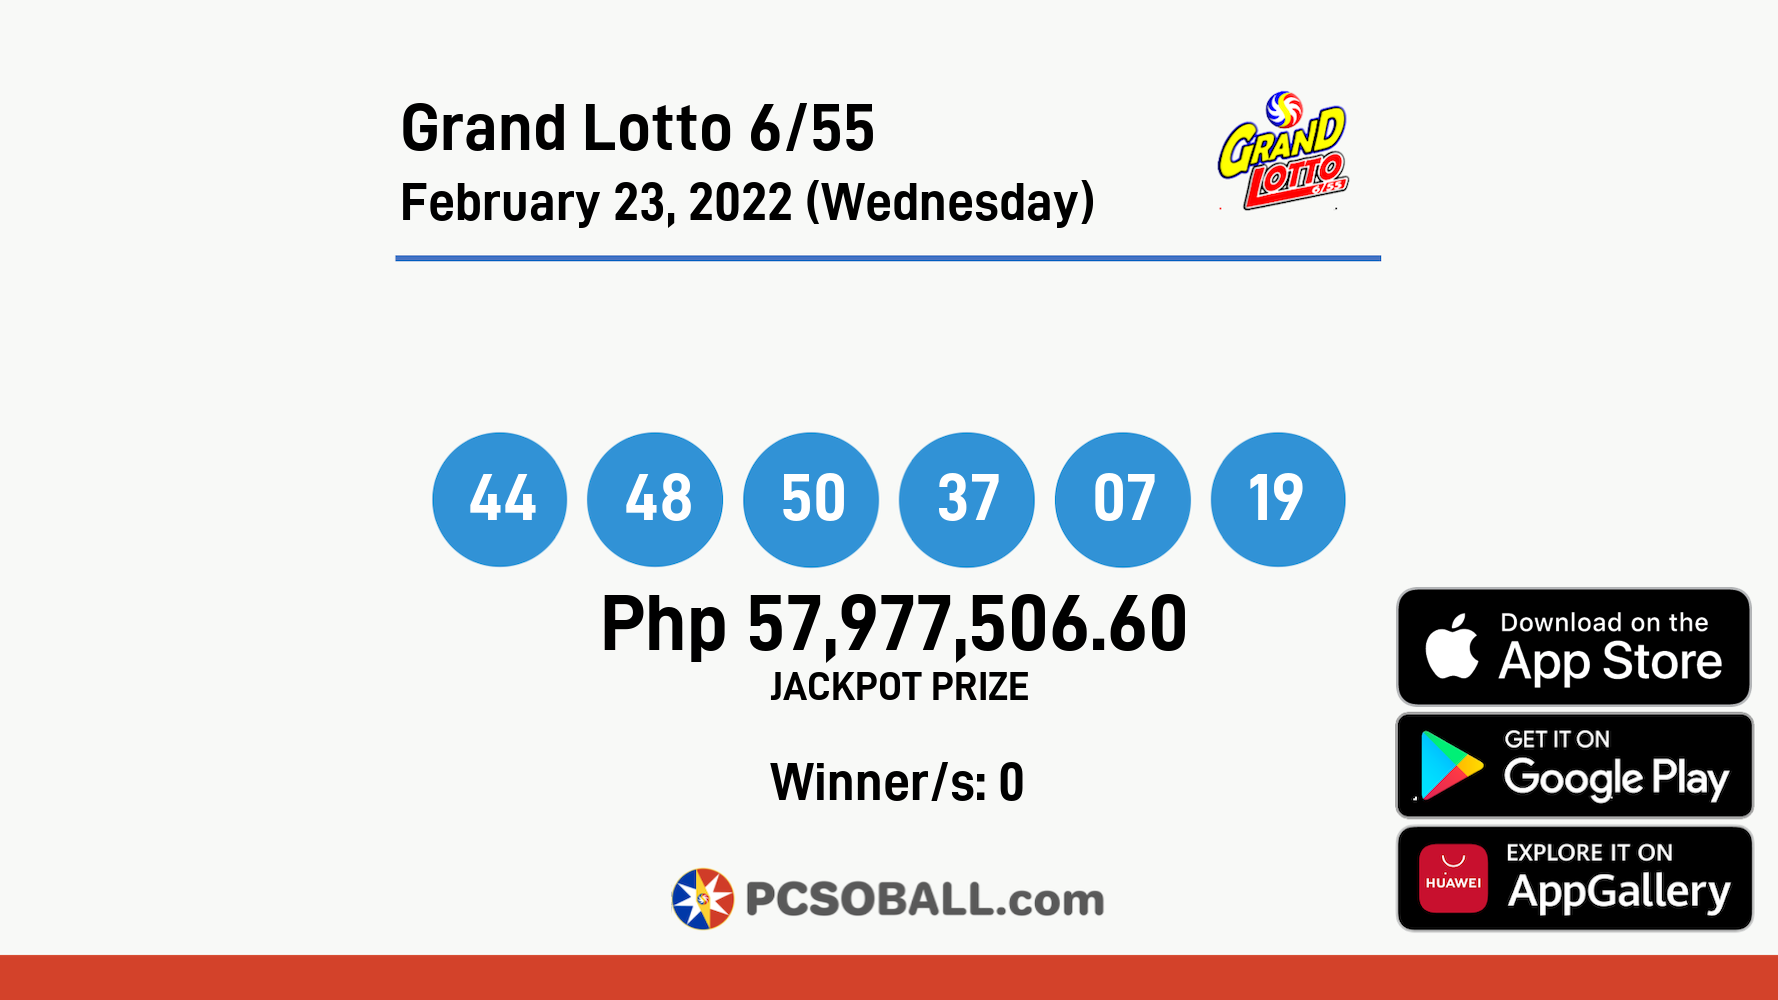 Grand Lotto 6/55 February 23, 2022 (Wednesday) Result